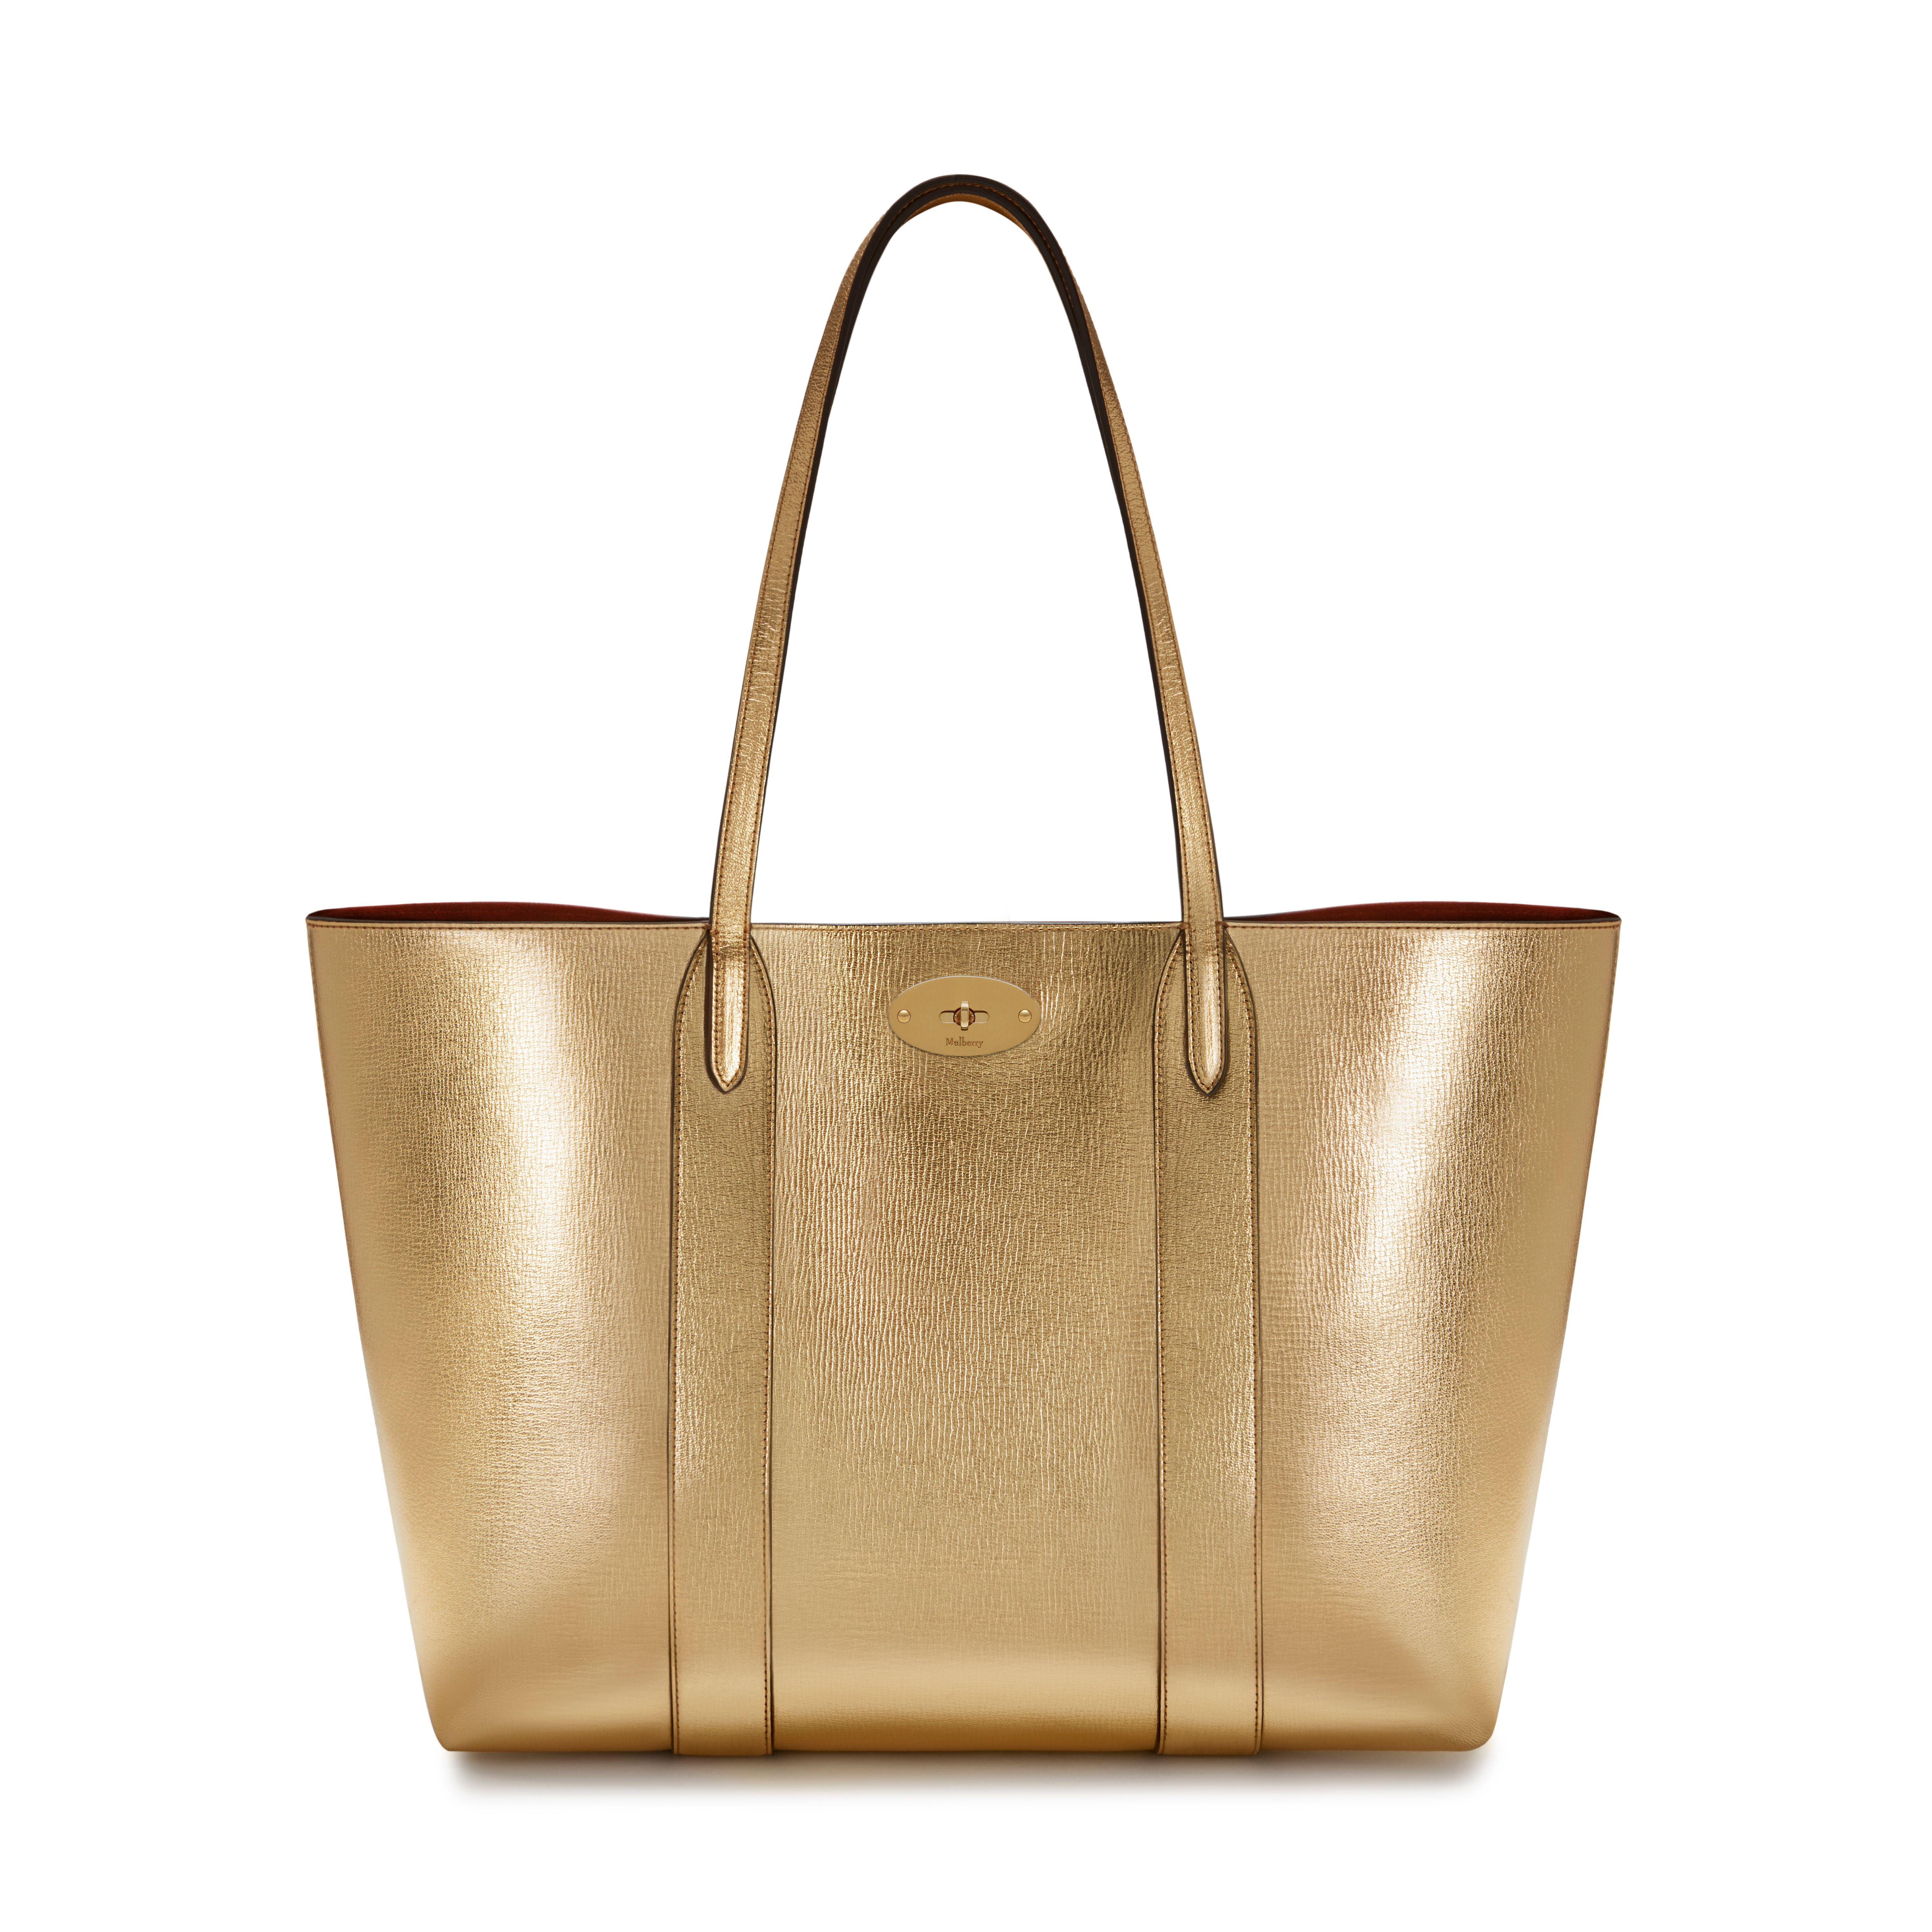 Mulberry Suede Bayswater Tote in Gold (Metallic) - Lyst